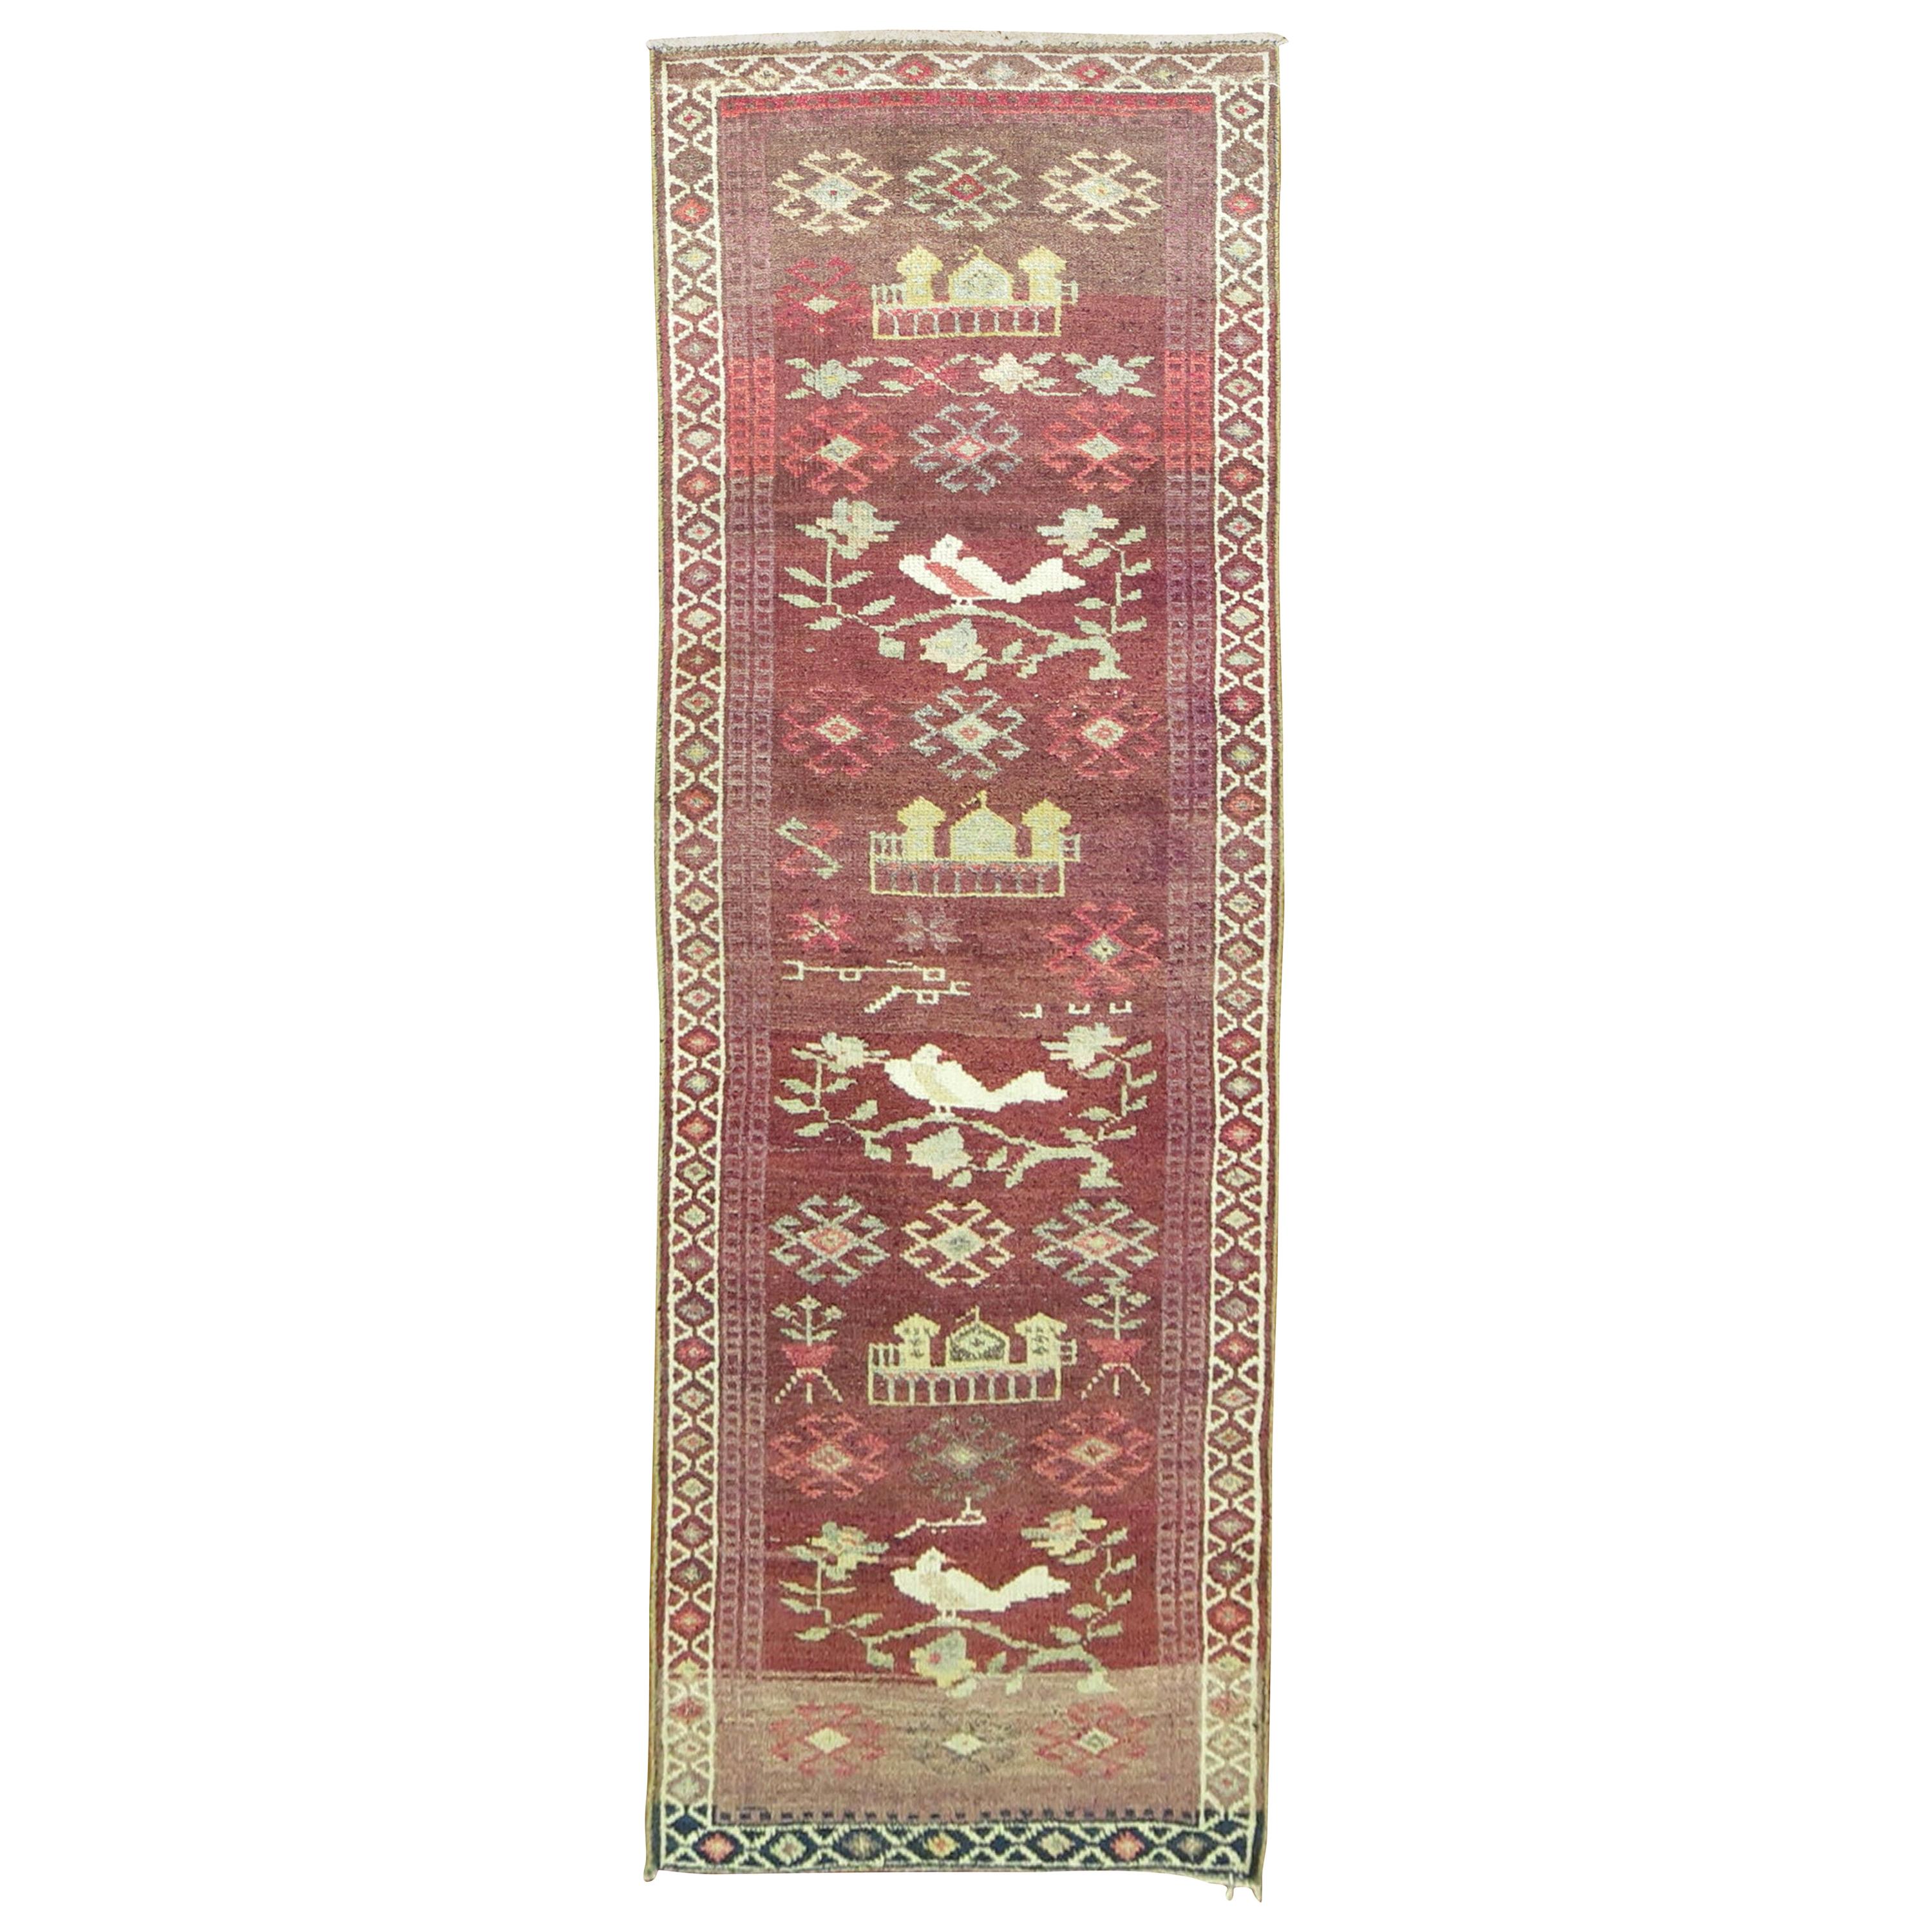 Turkish Anatolian runner featuring three white pigeons on a plum-colored field.

Measures: 3'1'' x 11'3''.